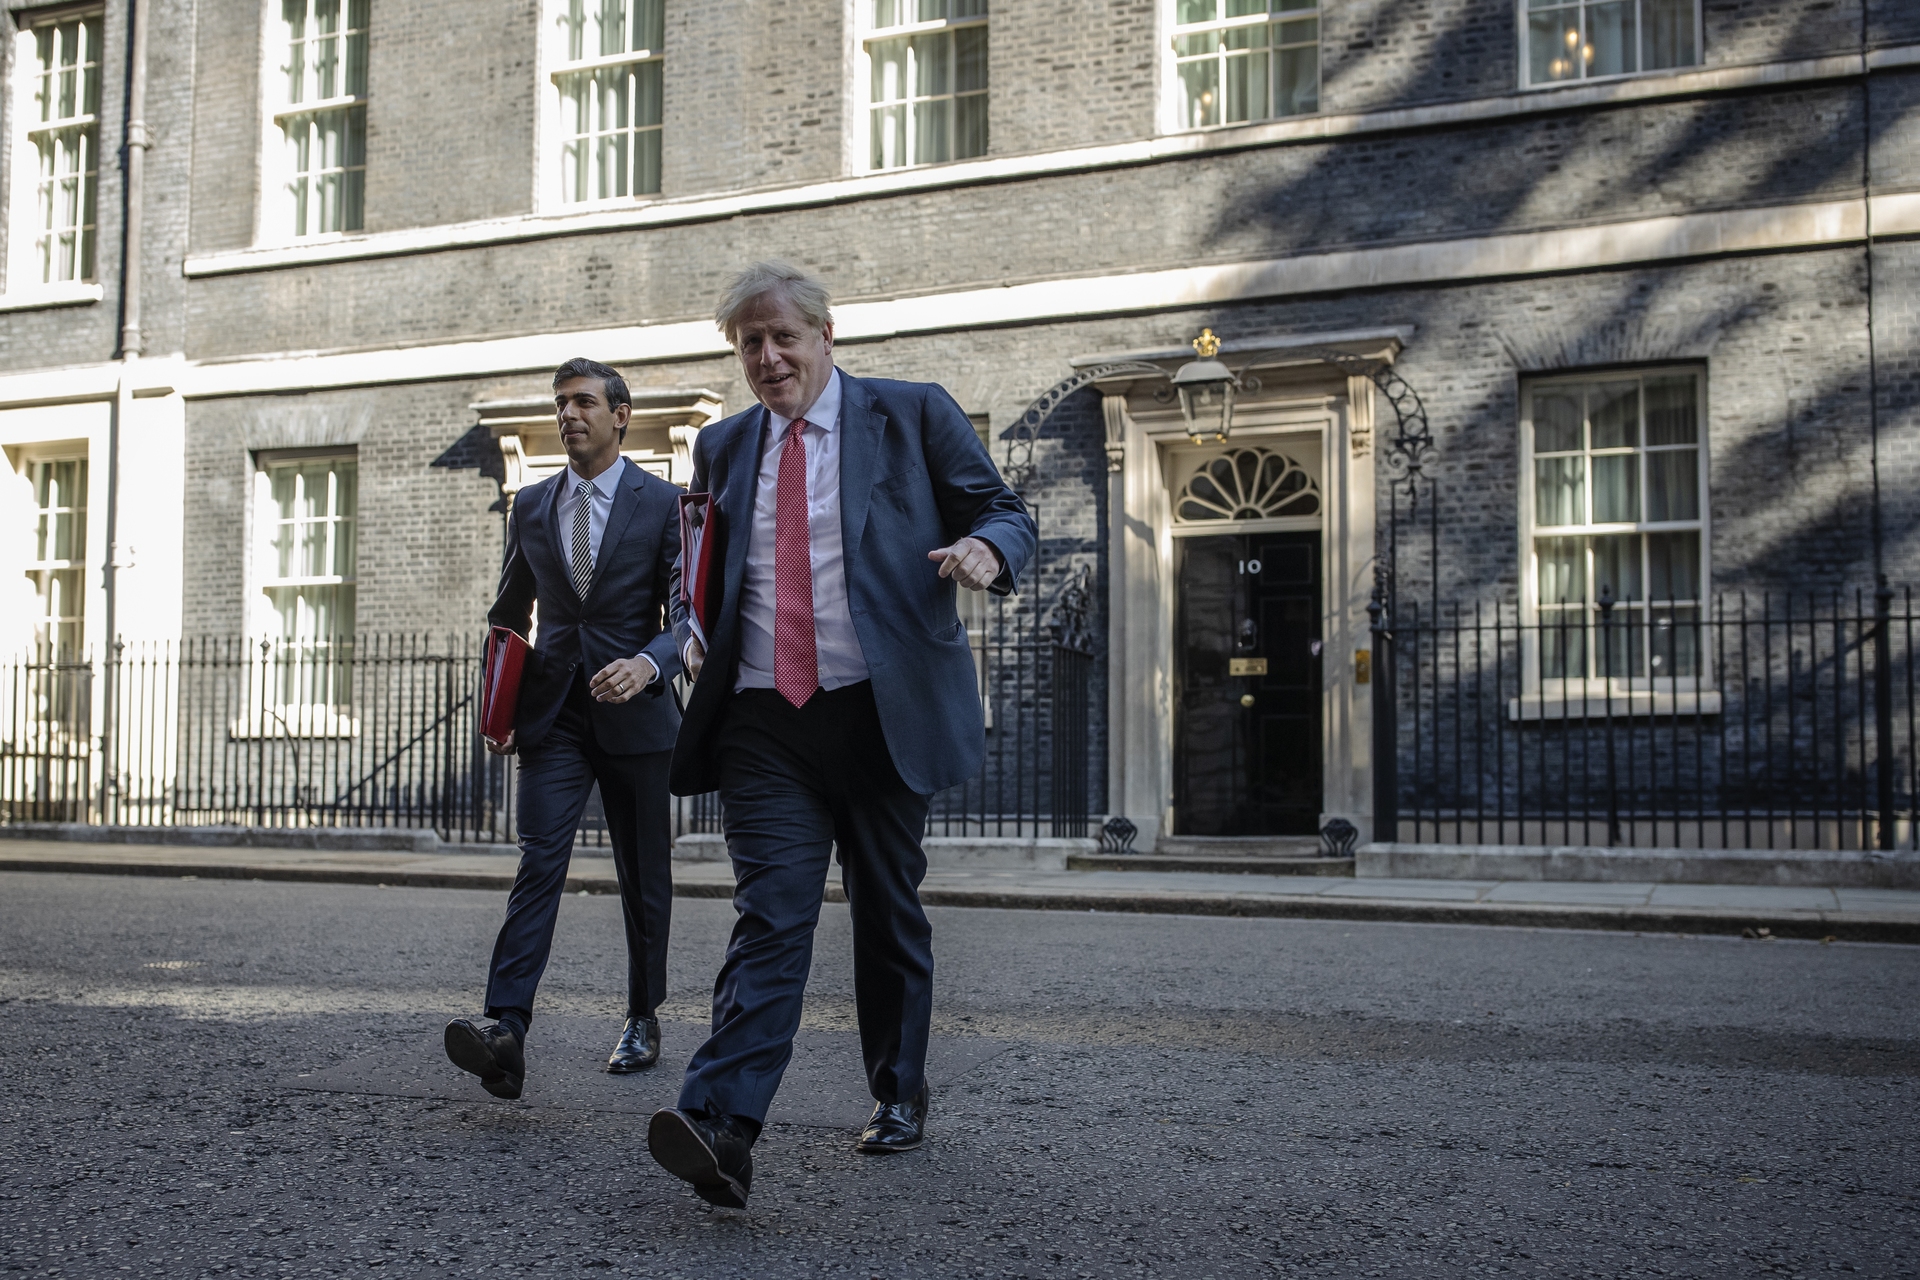 Boris Johnson and Rishi Sunak have both been fined for attending lockdown parties.